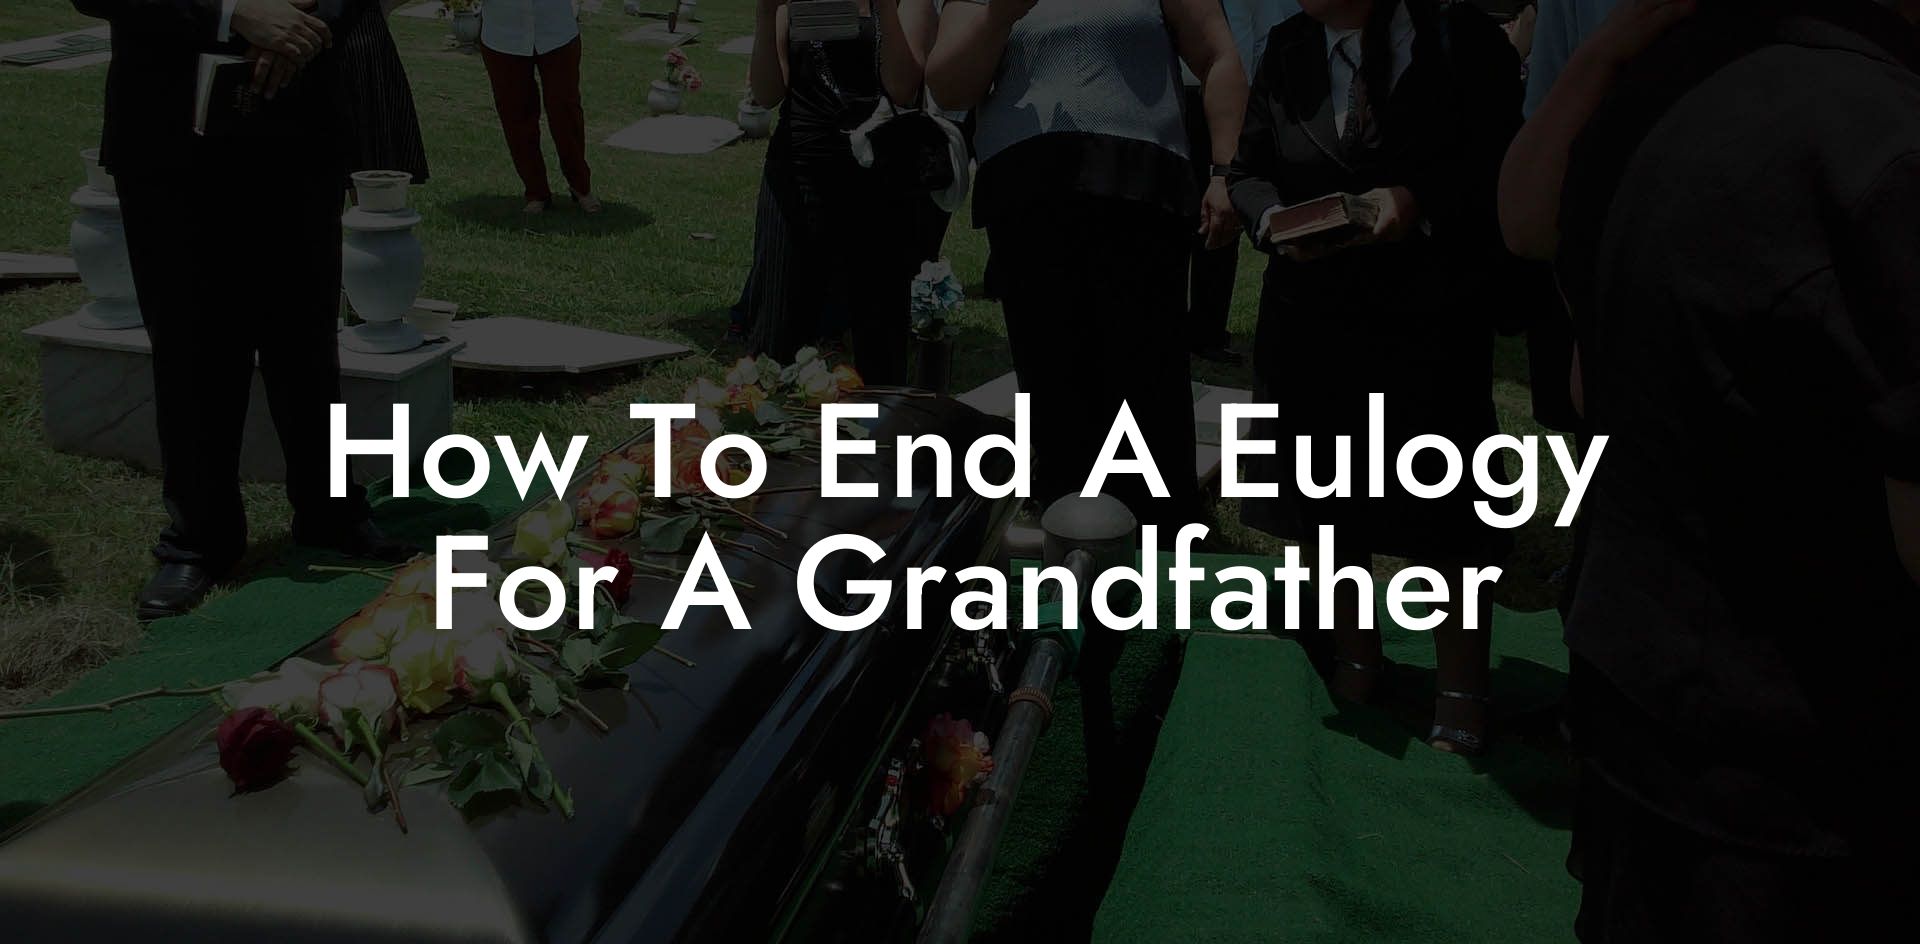 How To End A Eulogy For A Grandfather